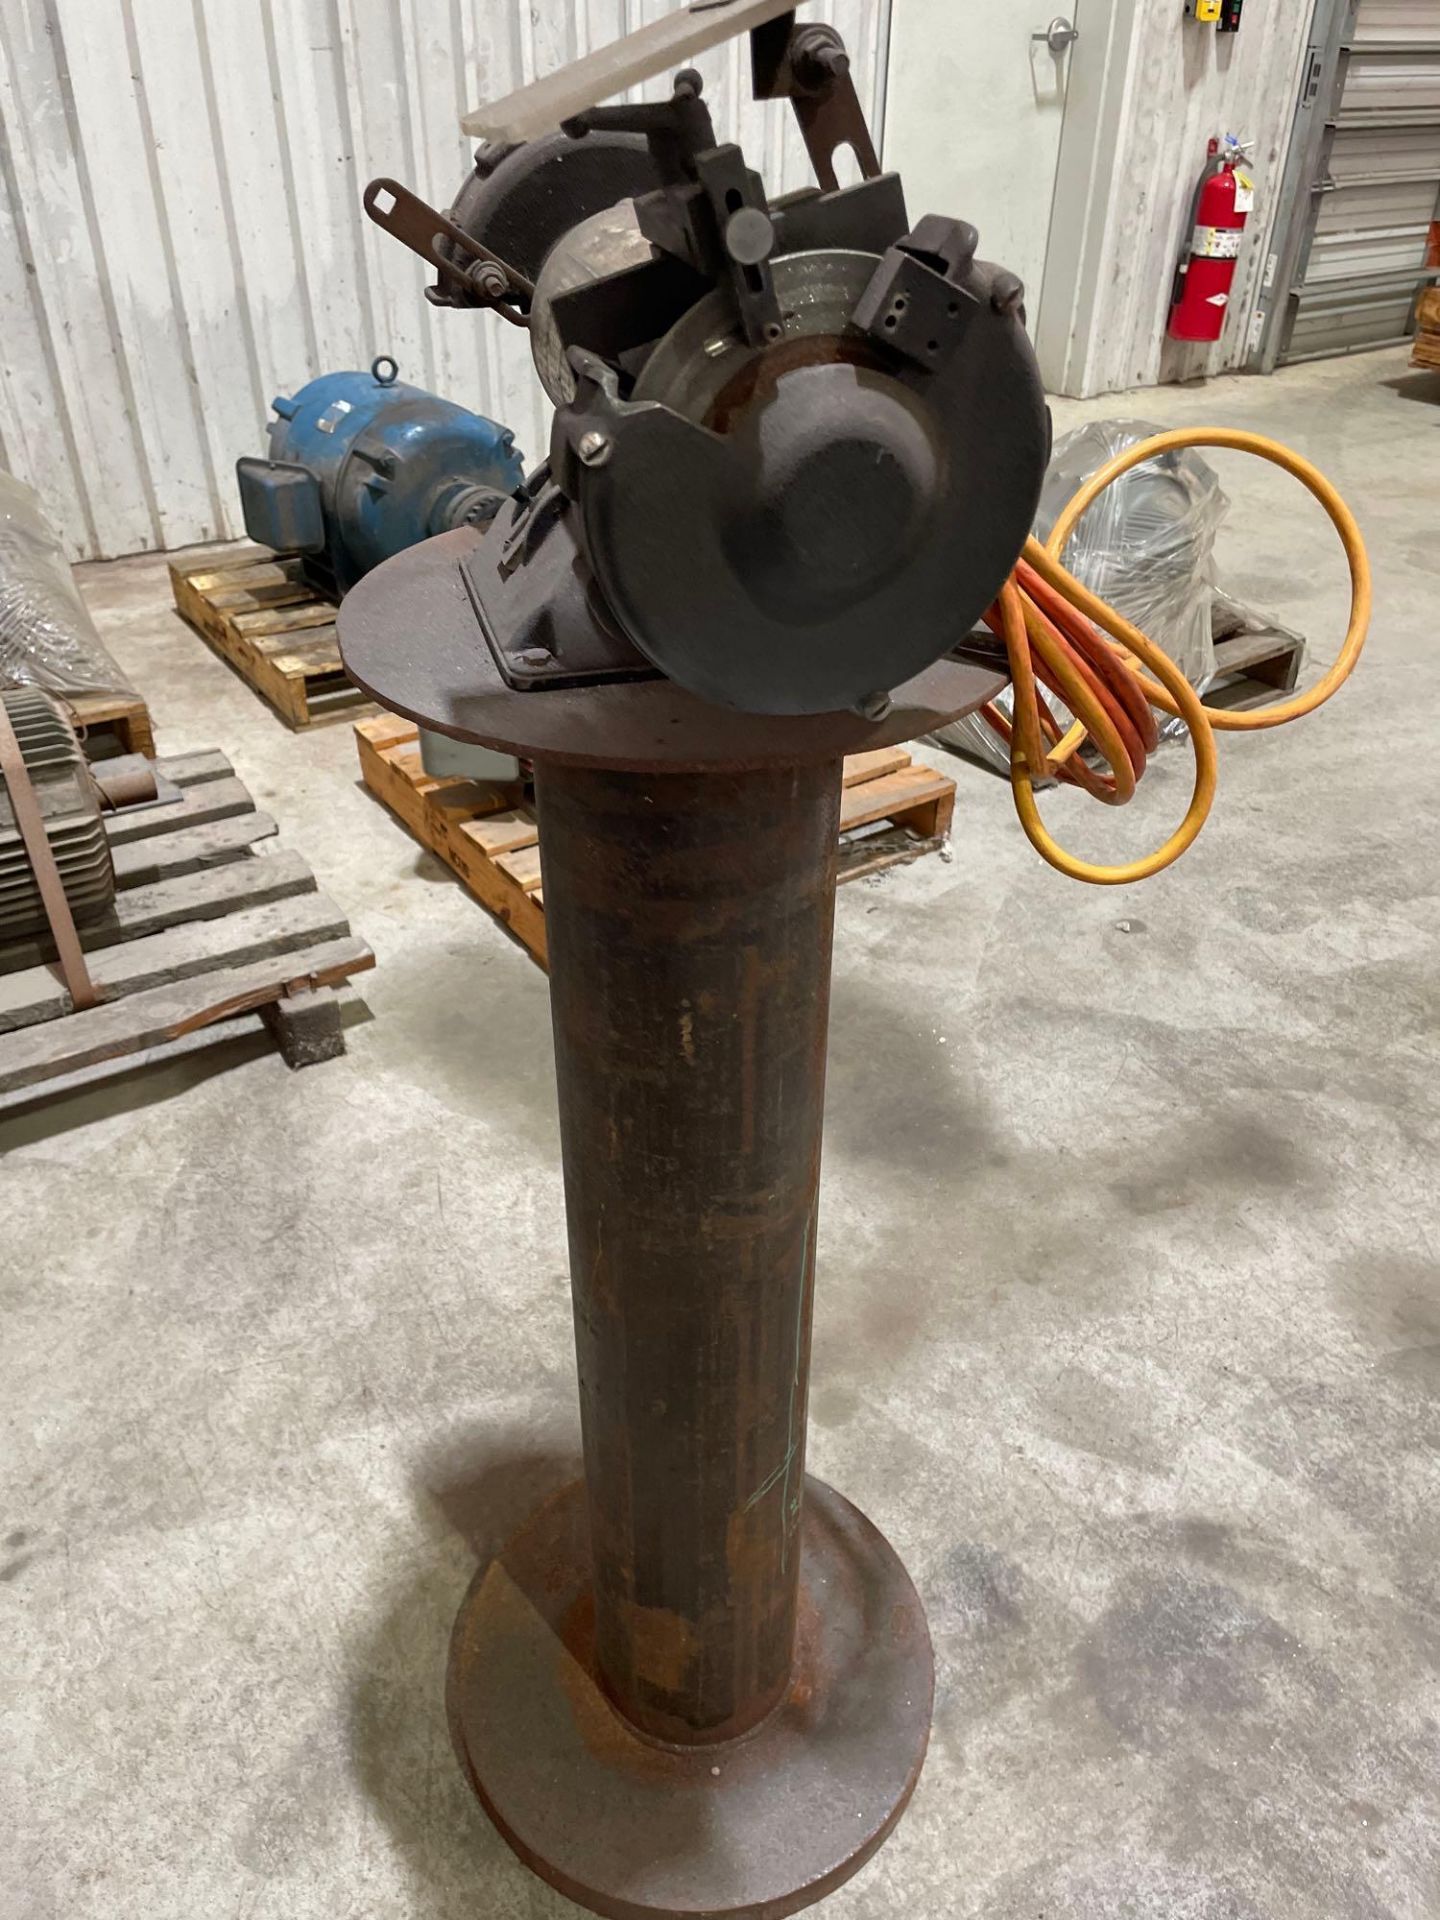 Diamond Ground Products Double End Grinder on Pedestal - Image 2 of 5